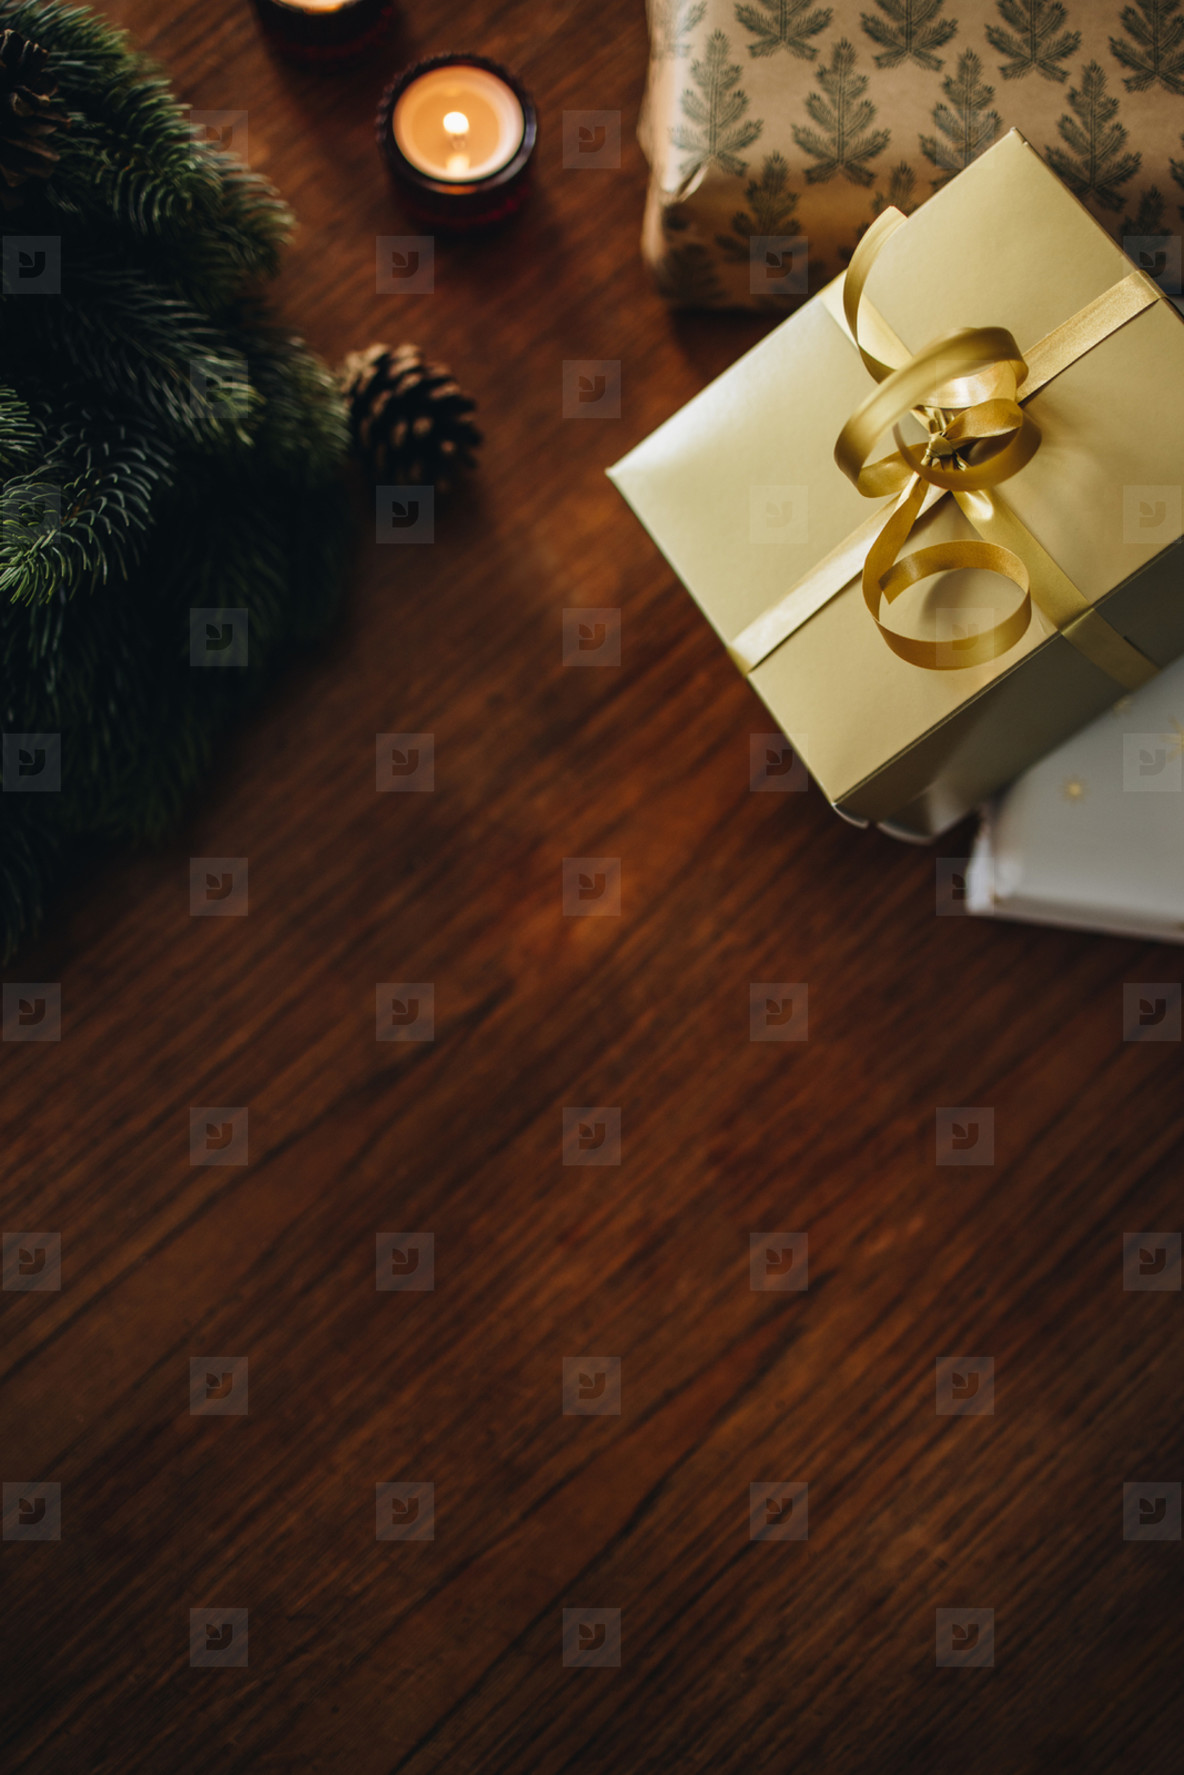 Decorative Christmas things on wooden table